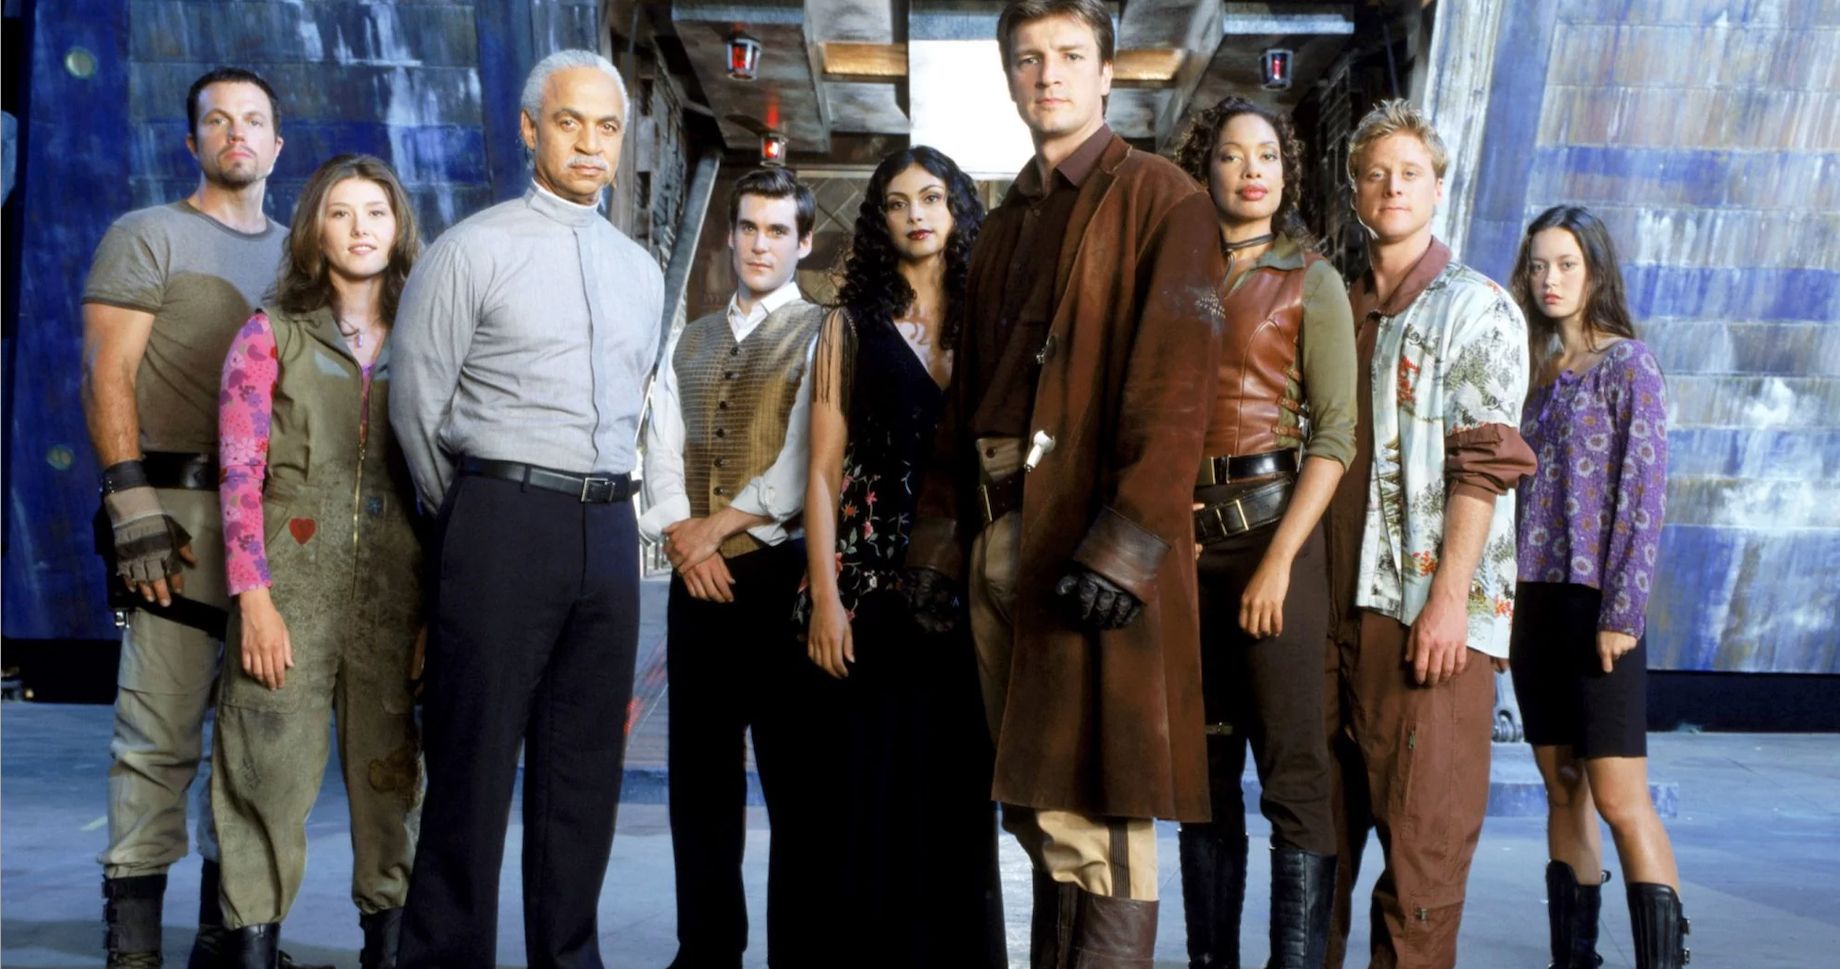 Firefly Writer Claims Joss Whedon Liked to Boast About Making Female Writers Cry